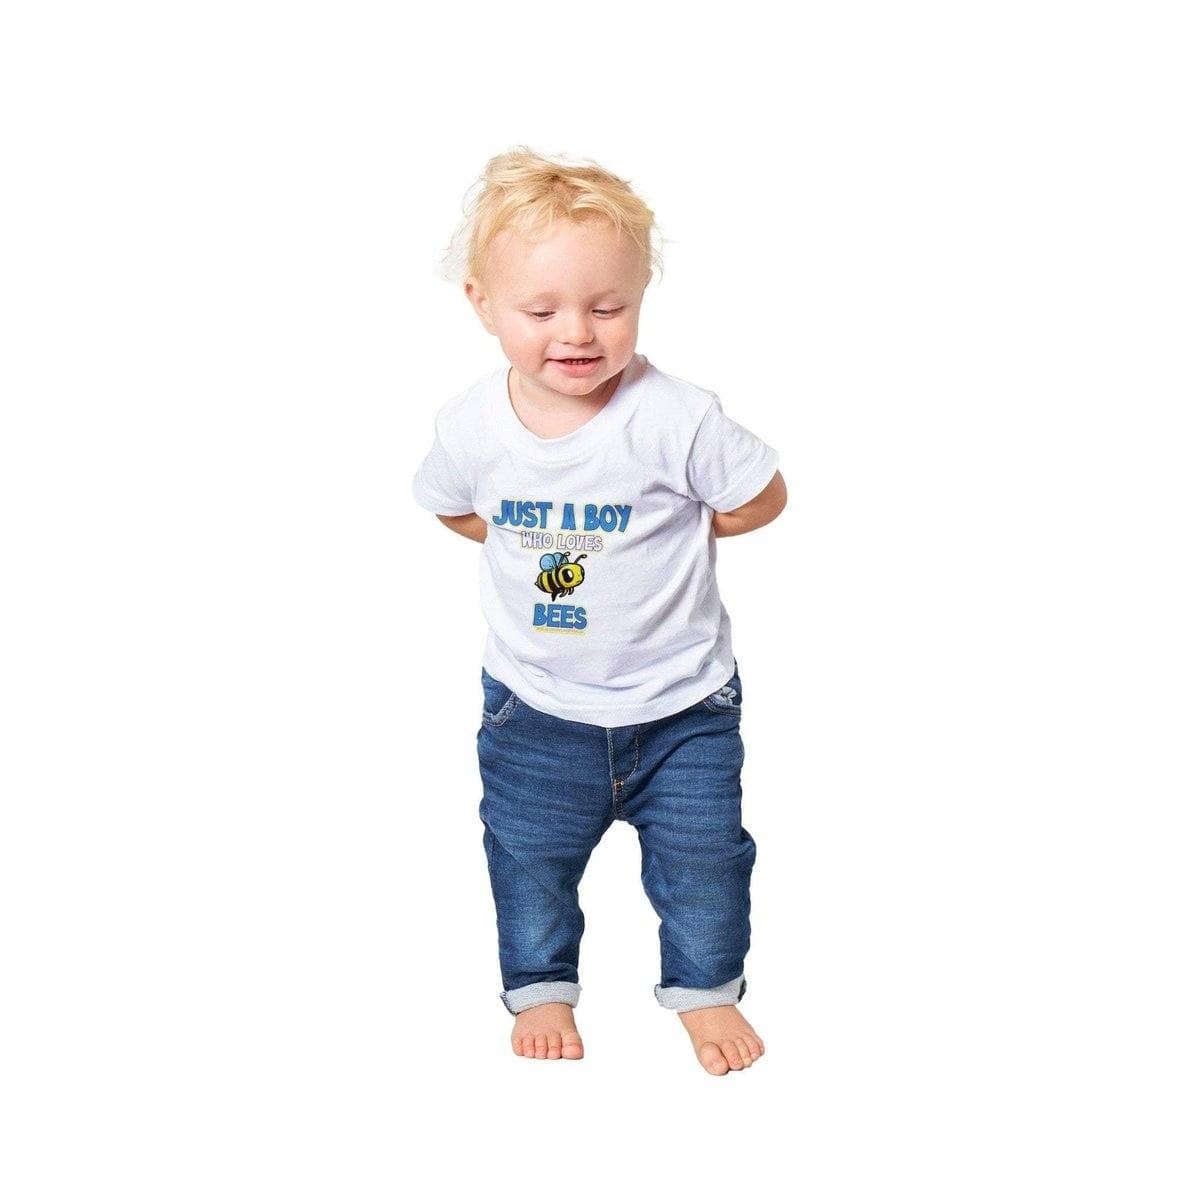 Just a Boy who loves bees T-Shirt - Baby Bee T-Shirts- Classic Baby Crewneck T-shirt Australia Online Color White / 6m